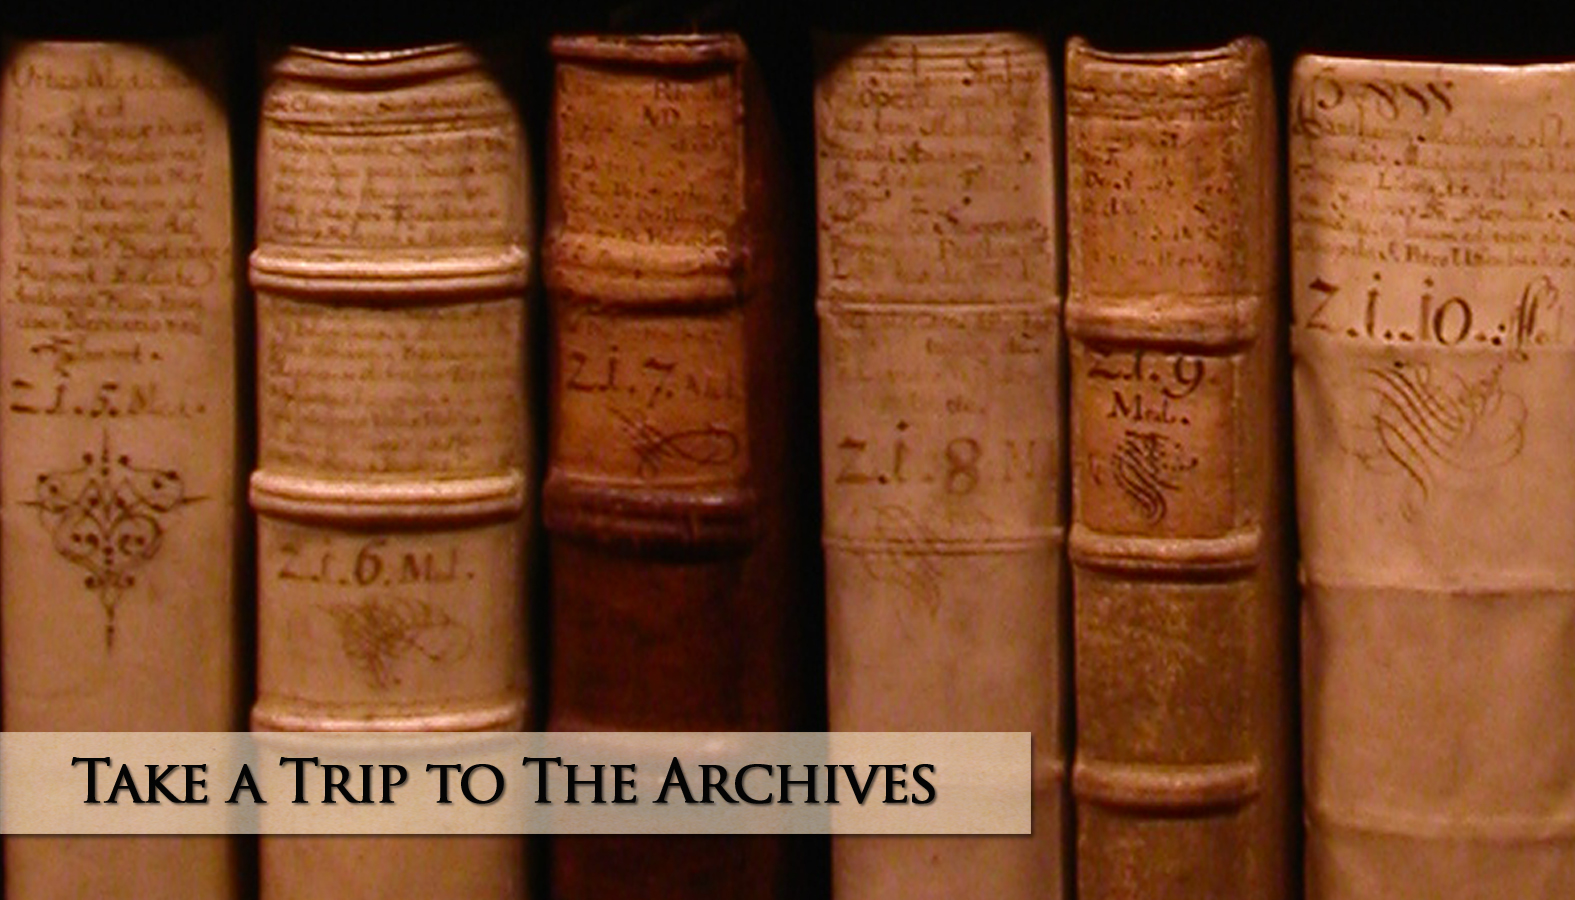 books on shelf - take a trip to the archive